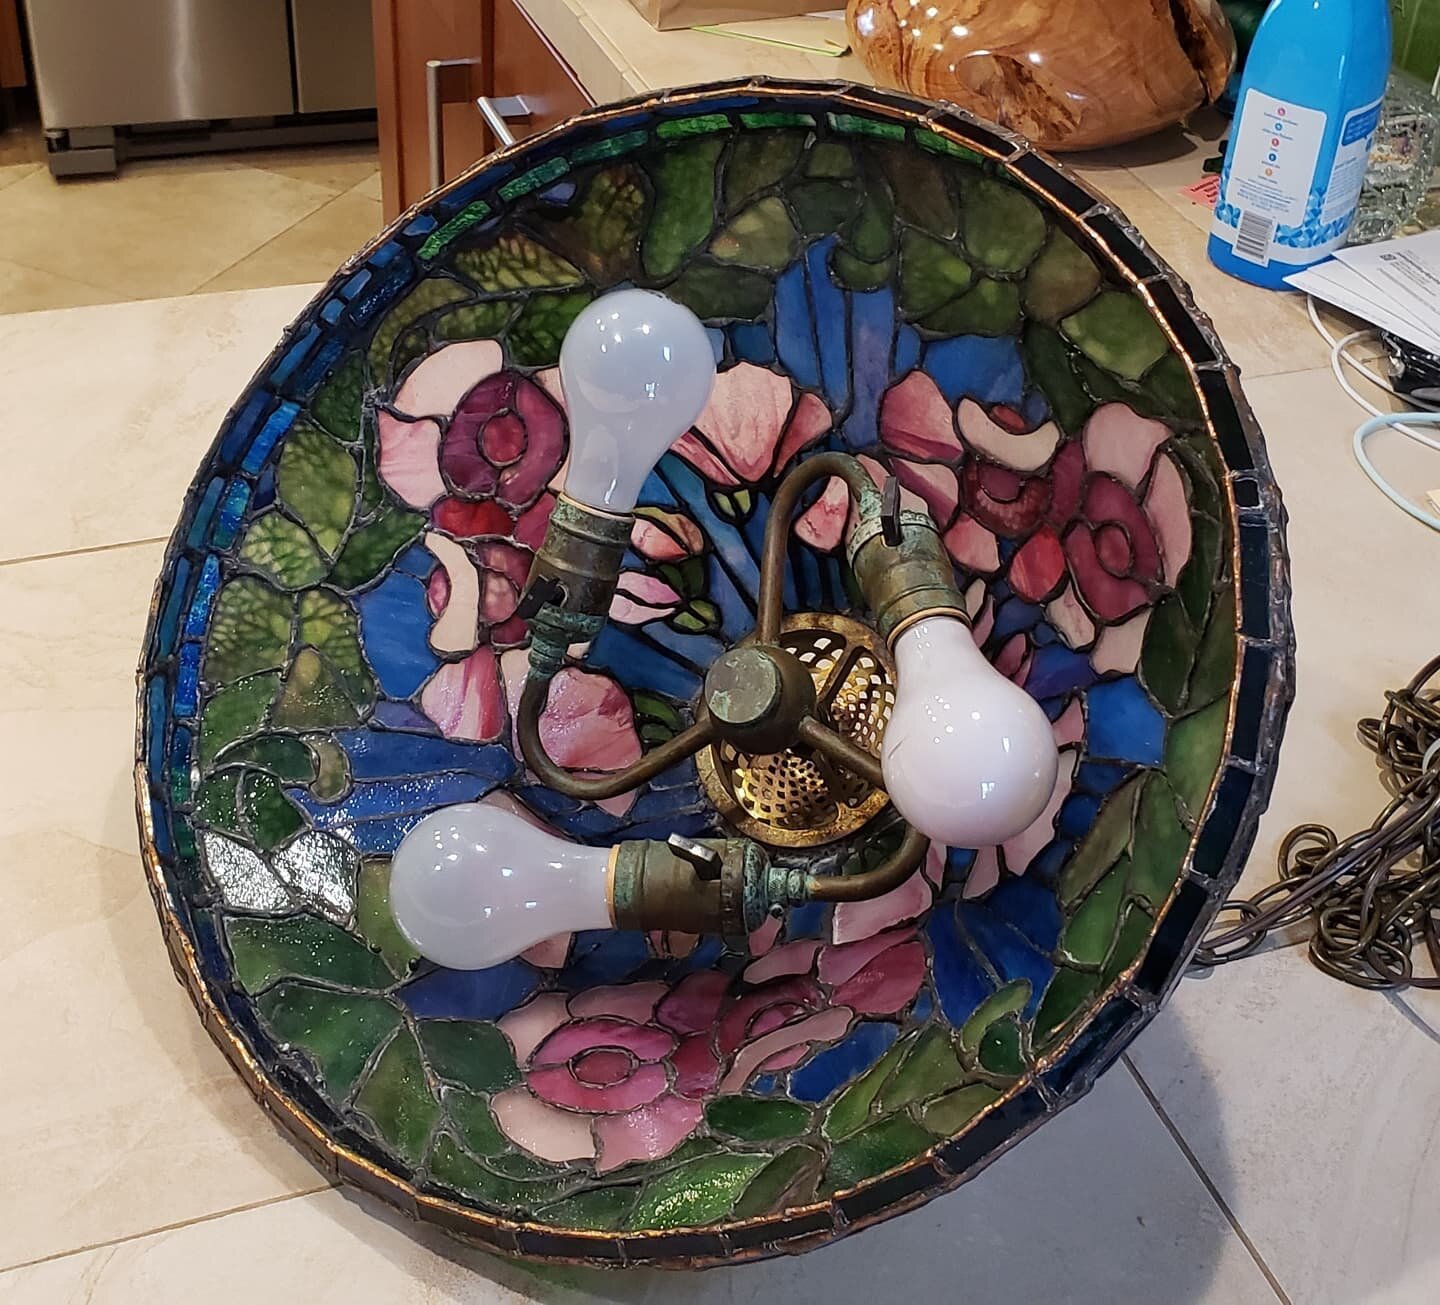 $150. Tiffany style Hanging Lamp Stained Glass Pendant Light Fixtures Kitchen Island Lighting 17 inch diameter Lampshade Width Deco for Dining Room. Has a long chain and wall plug for easy use. Works great. Has 3 Fixtures for plenty of light. 
Plus t